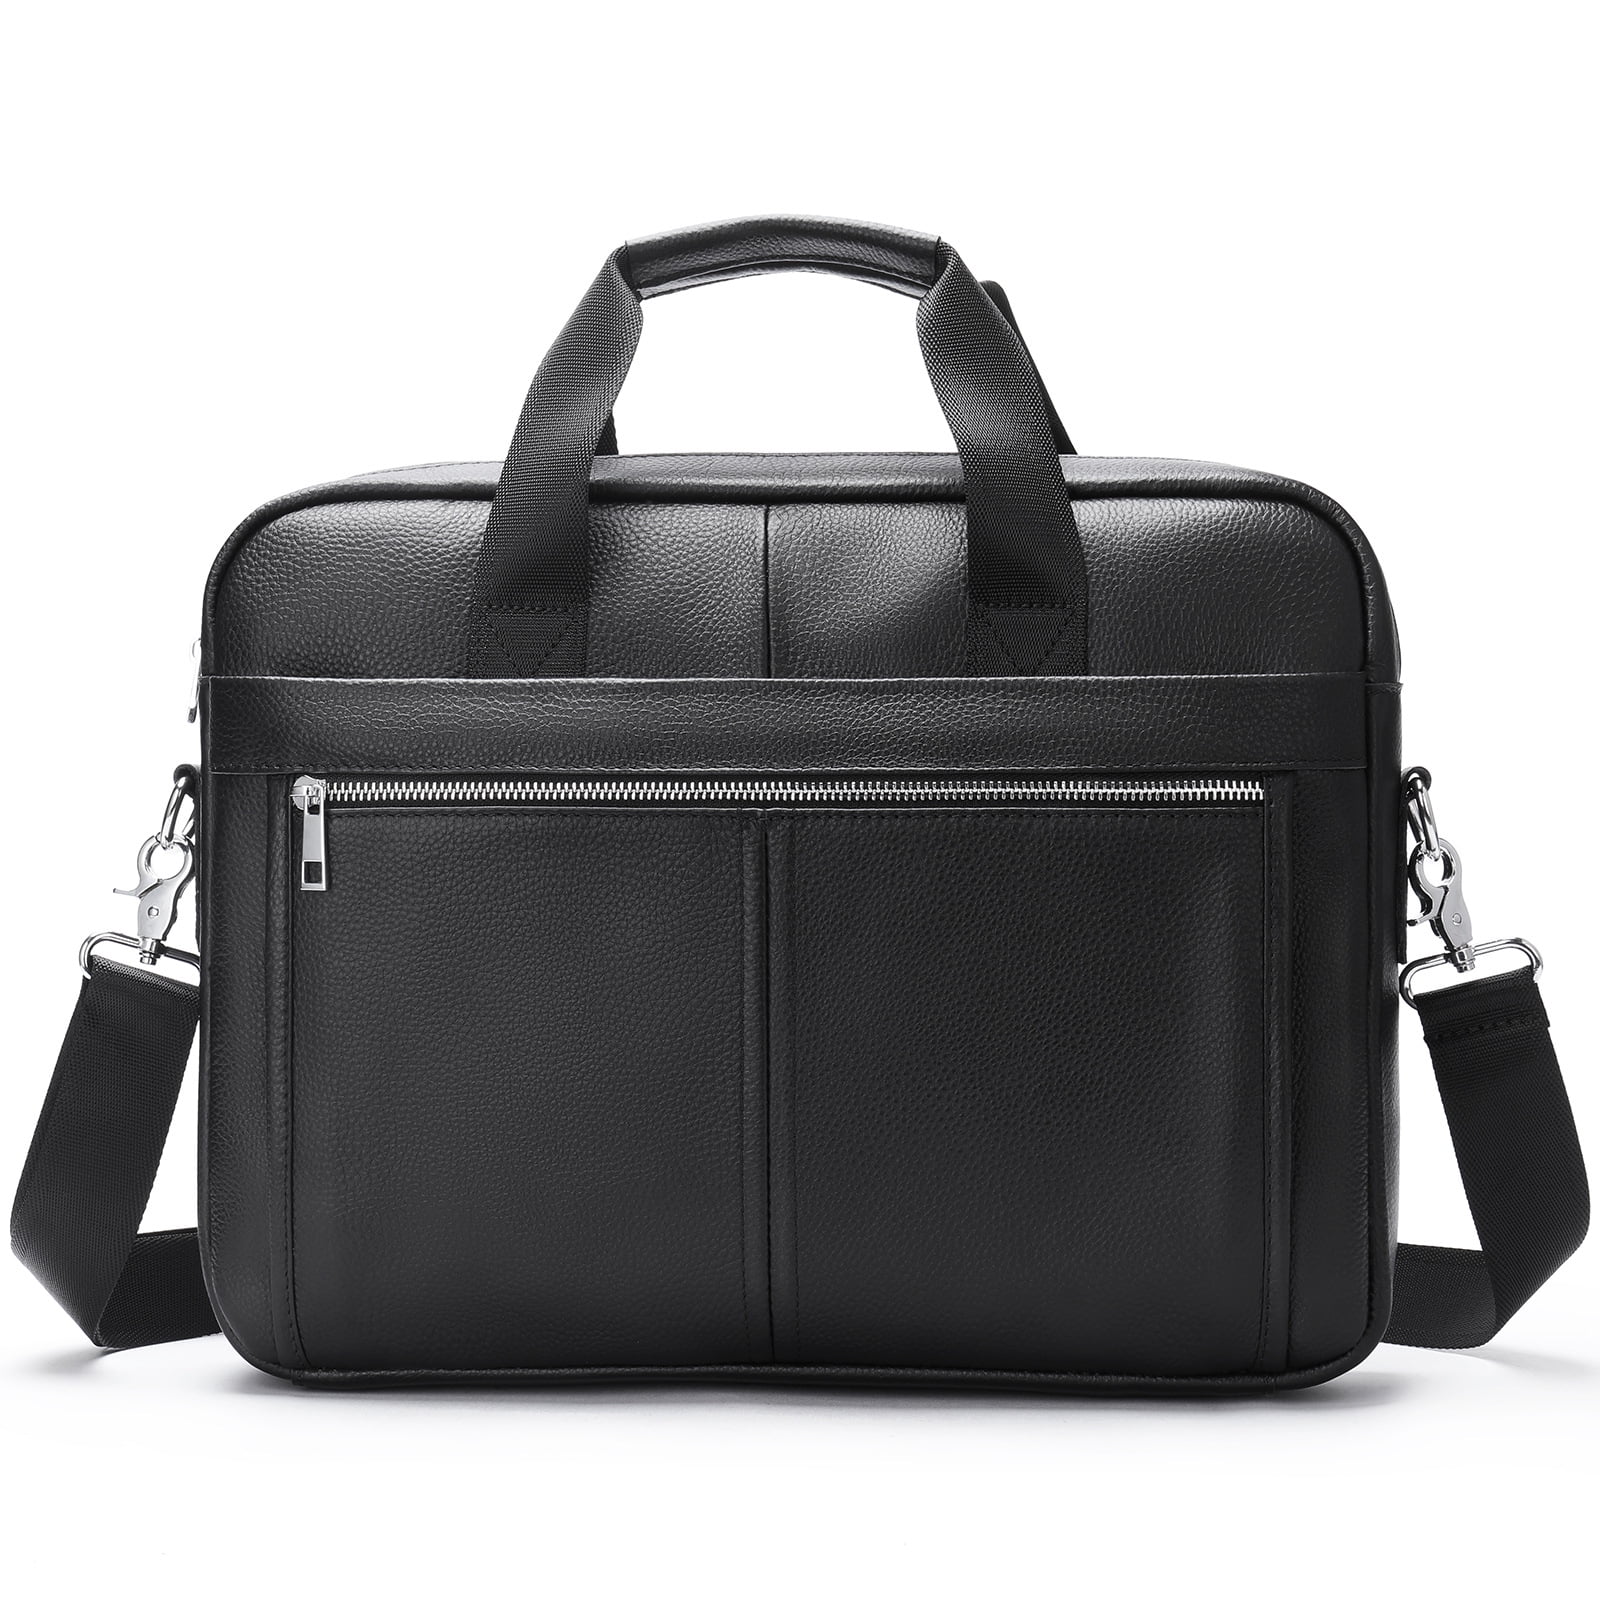 Laptop Bag for Men Briefcases Genuine Leather Totes Bag A4 Document ...